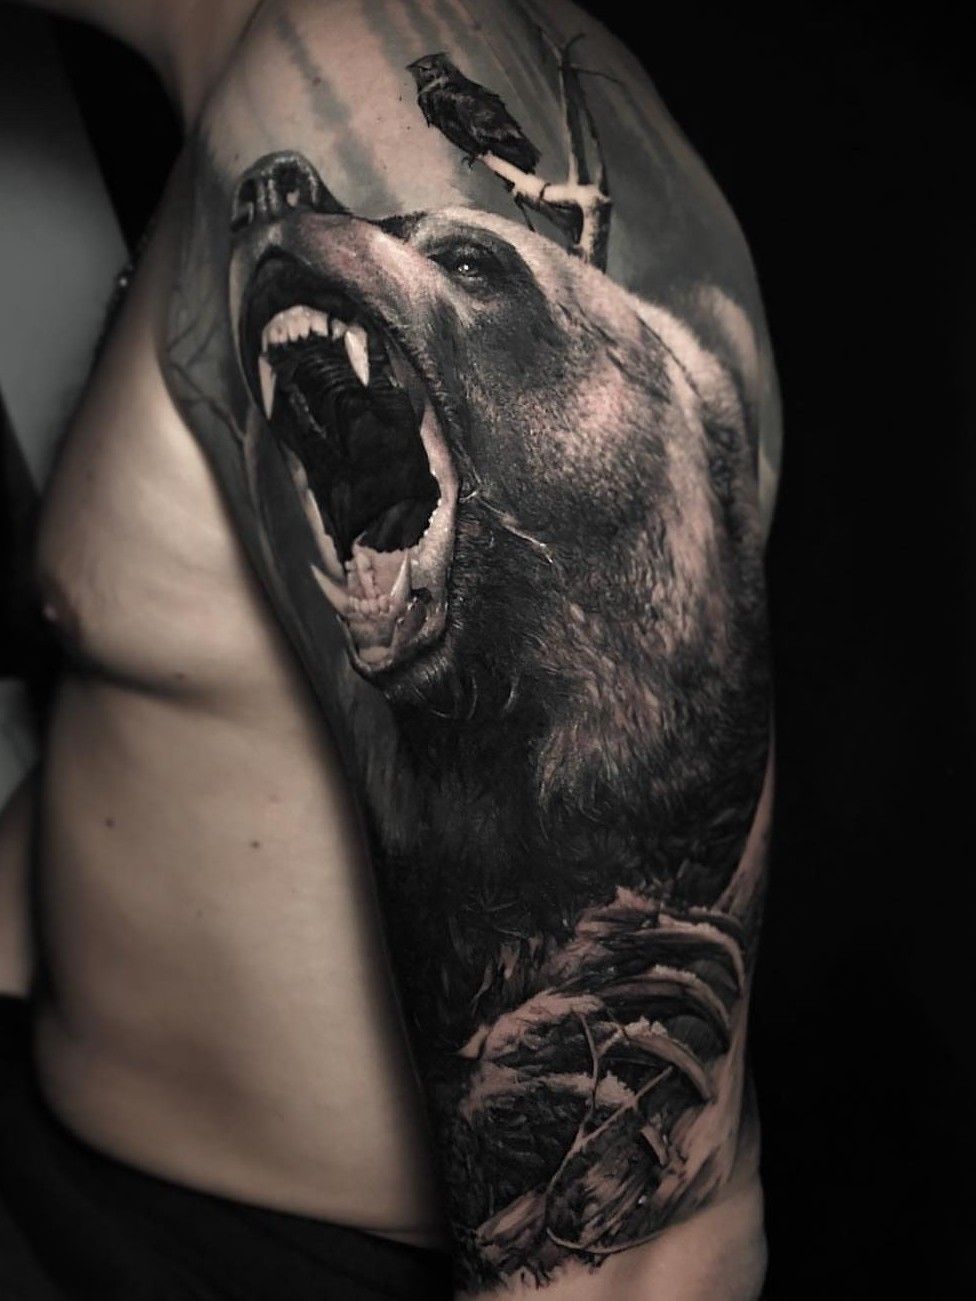 Bear tattoo done by our artist Seminyak studio BOOK YOUR SPOT NOW Please  DM or Contact us to secure your  Instagram